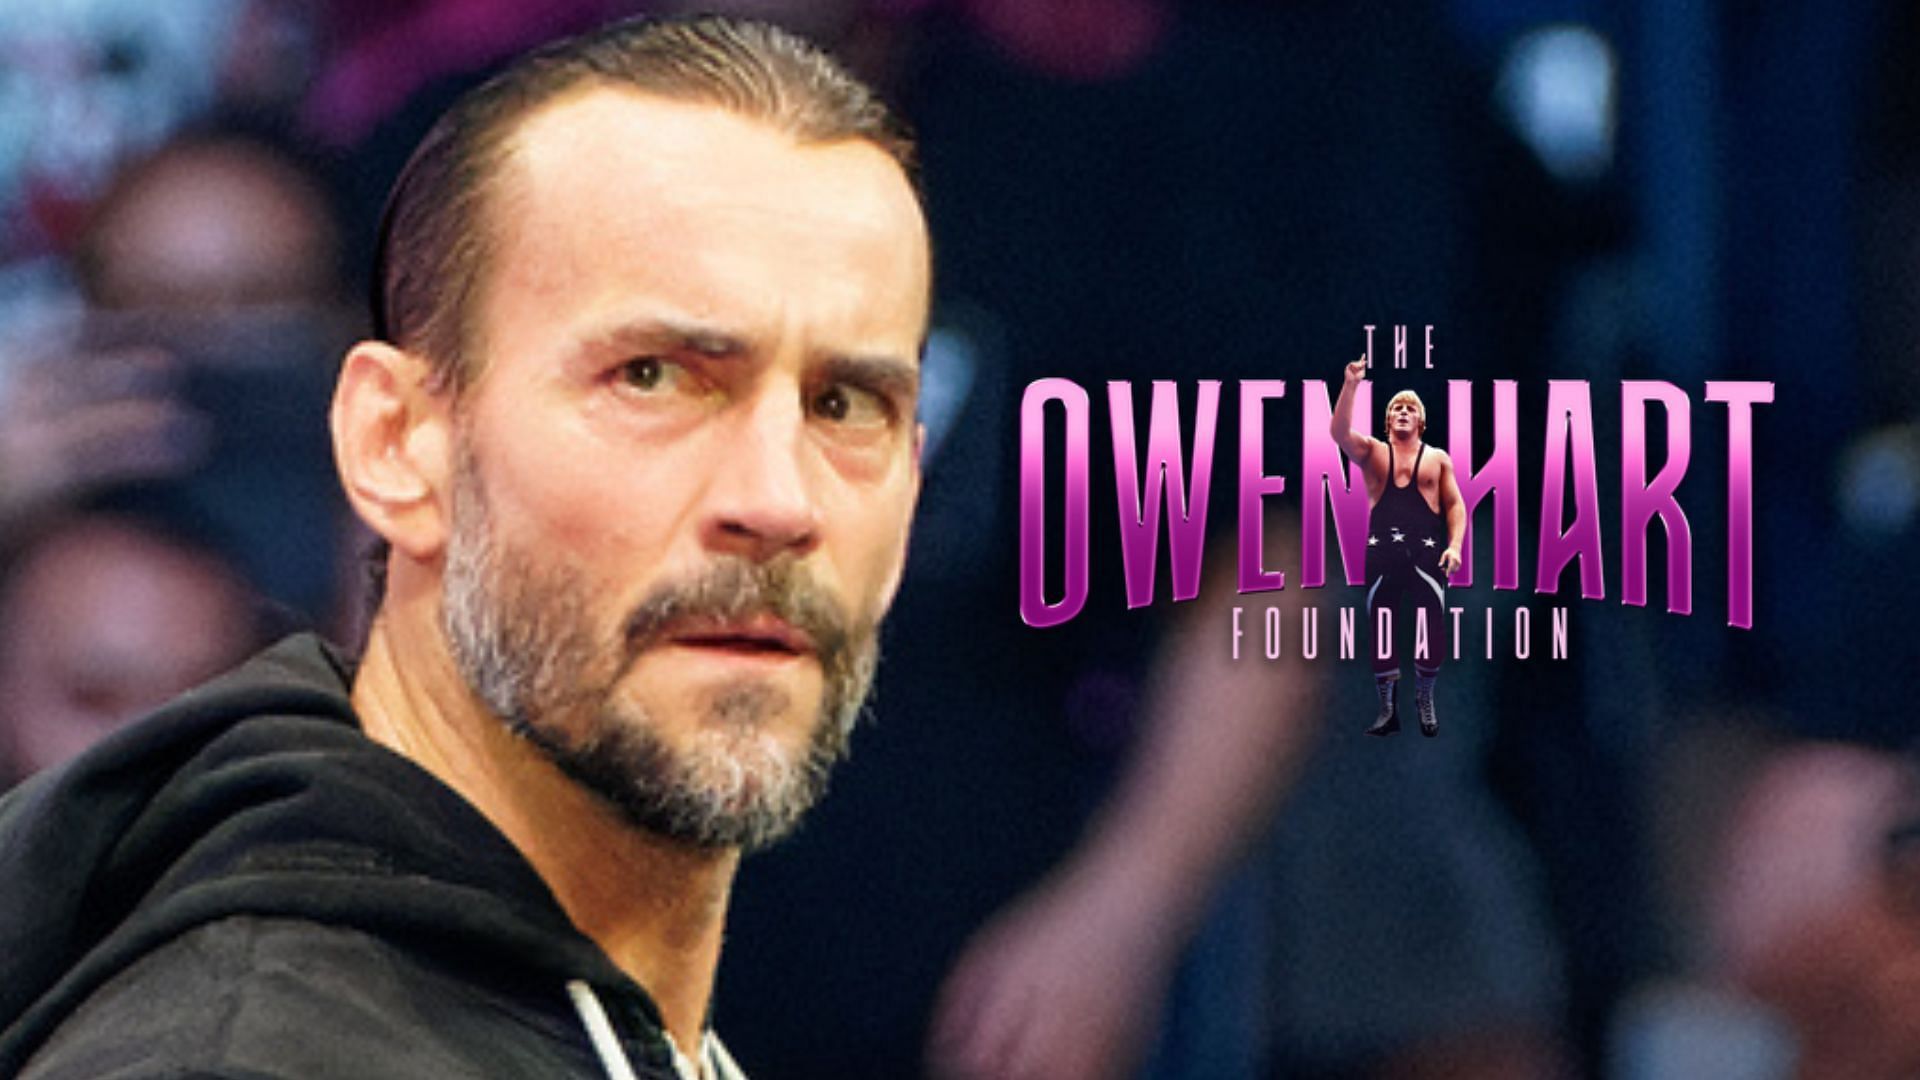 Who could cost CM Punk the Owen Hart Foundation Tournament?